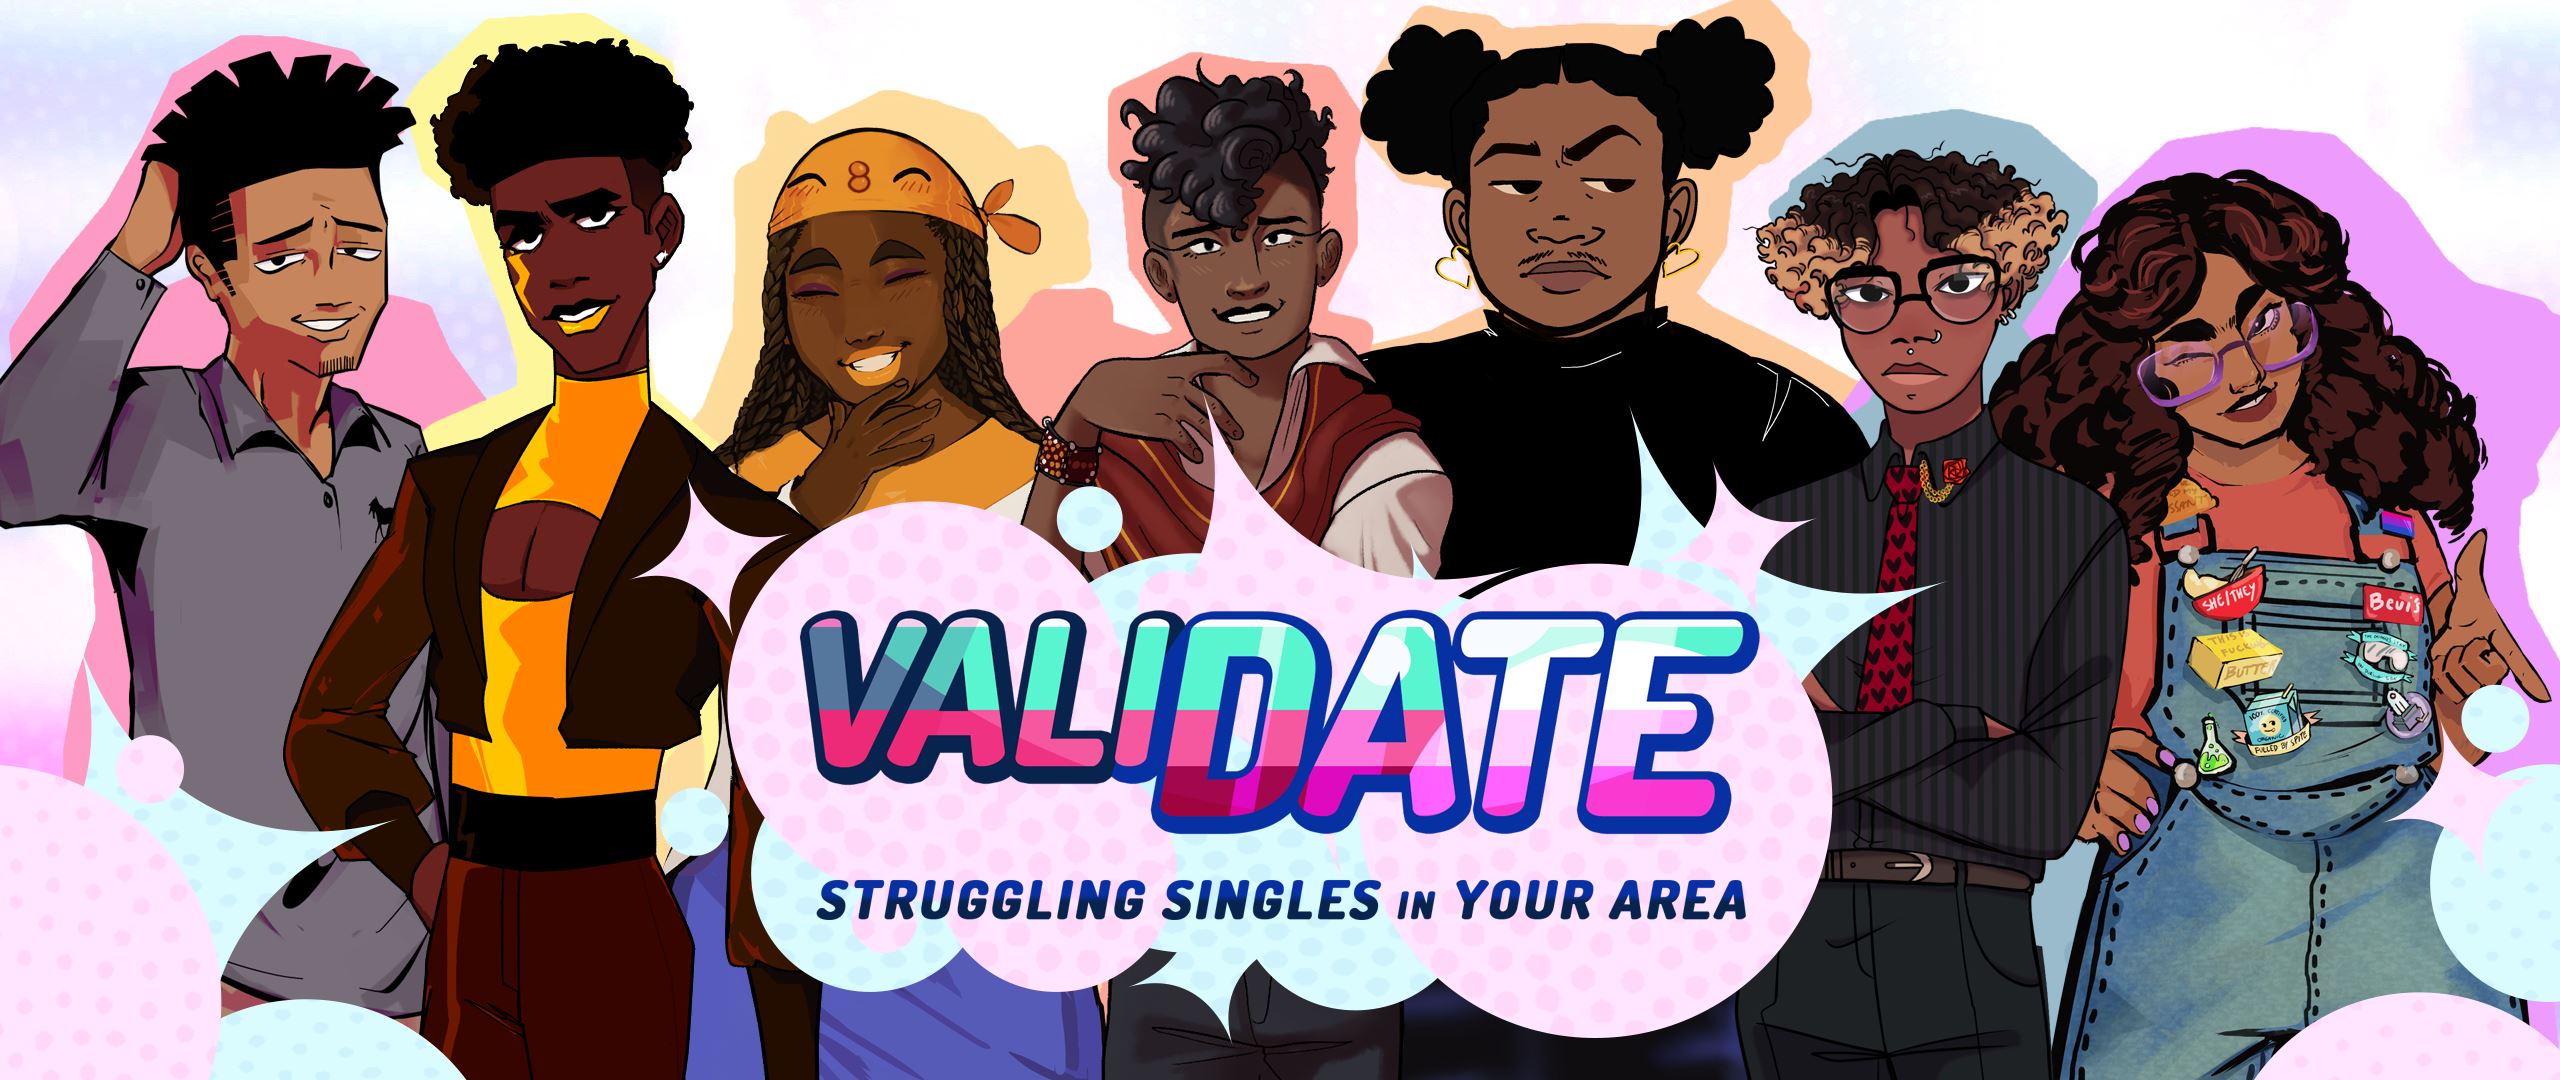 ValiDate: Struggling Singles in Your Area porn xxx game download cover